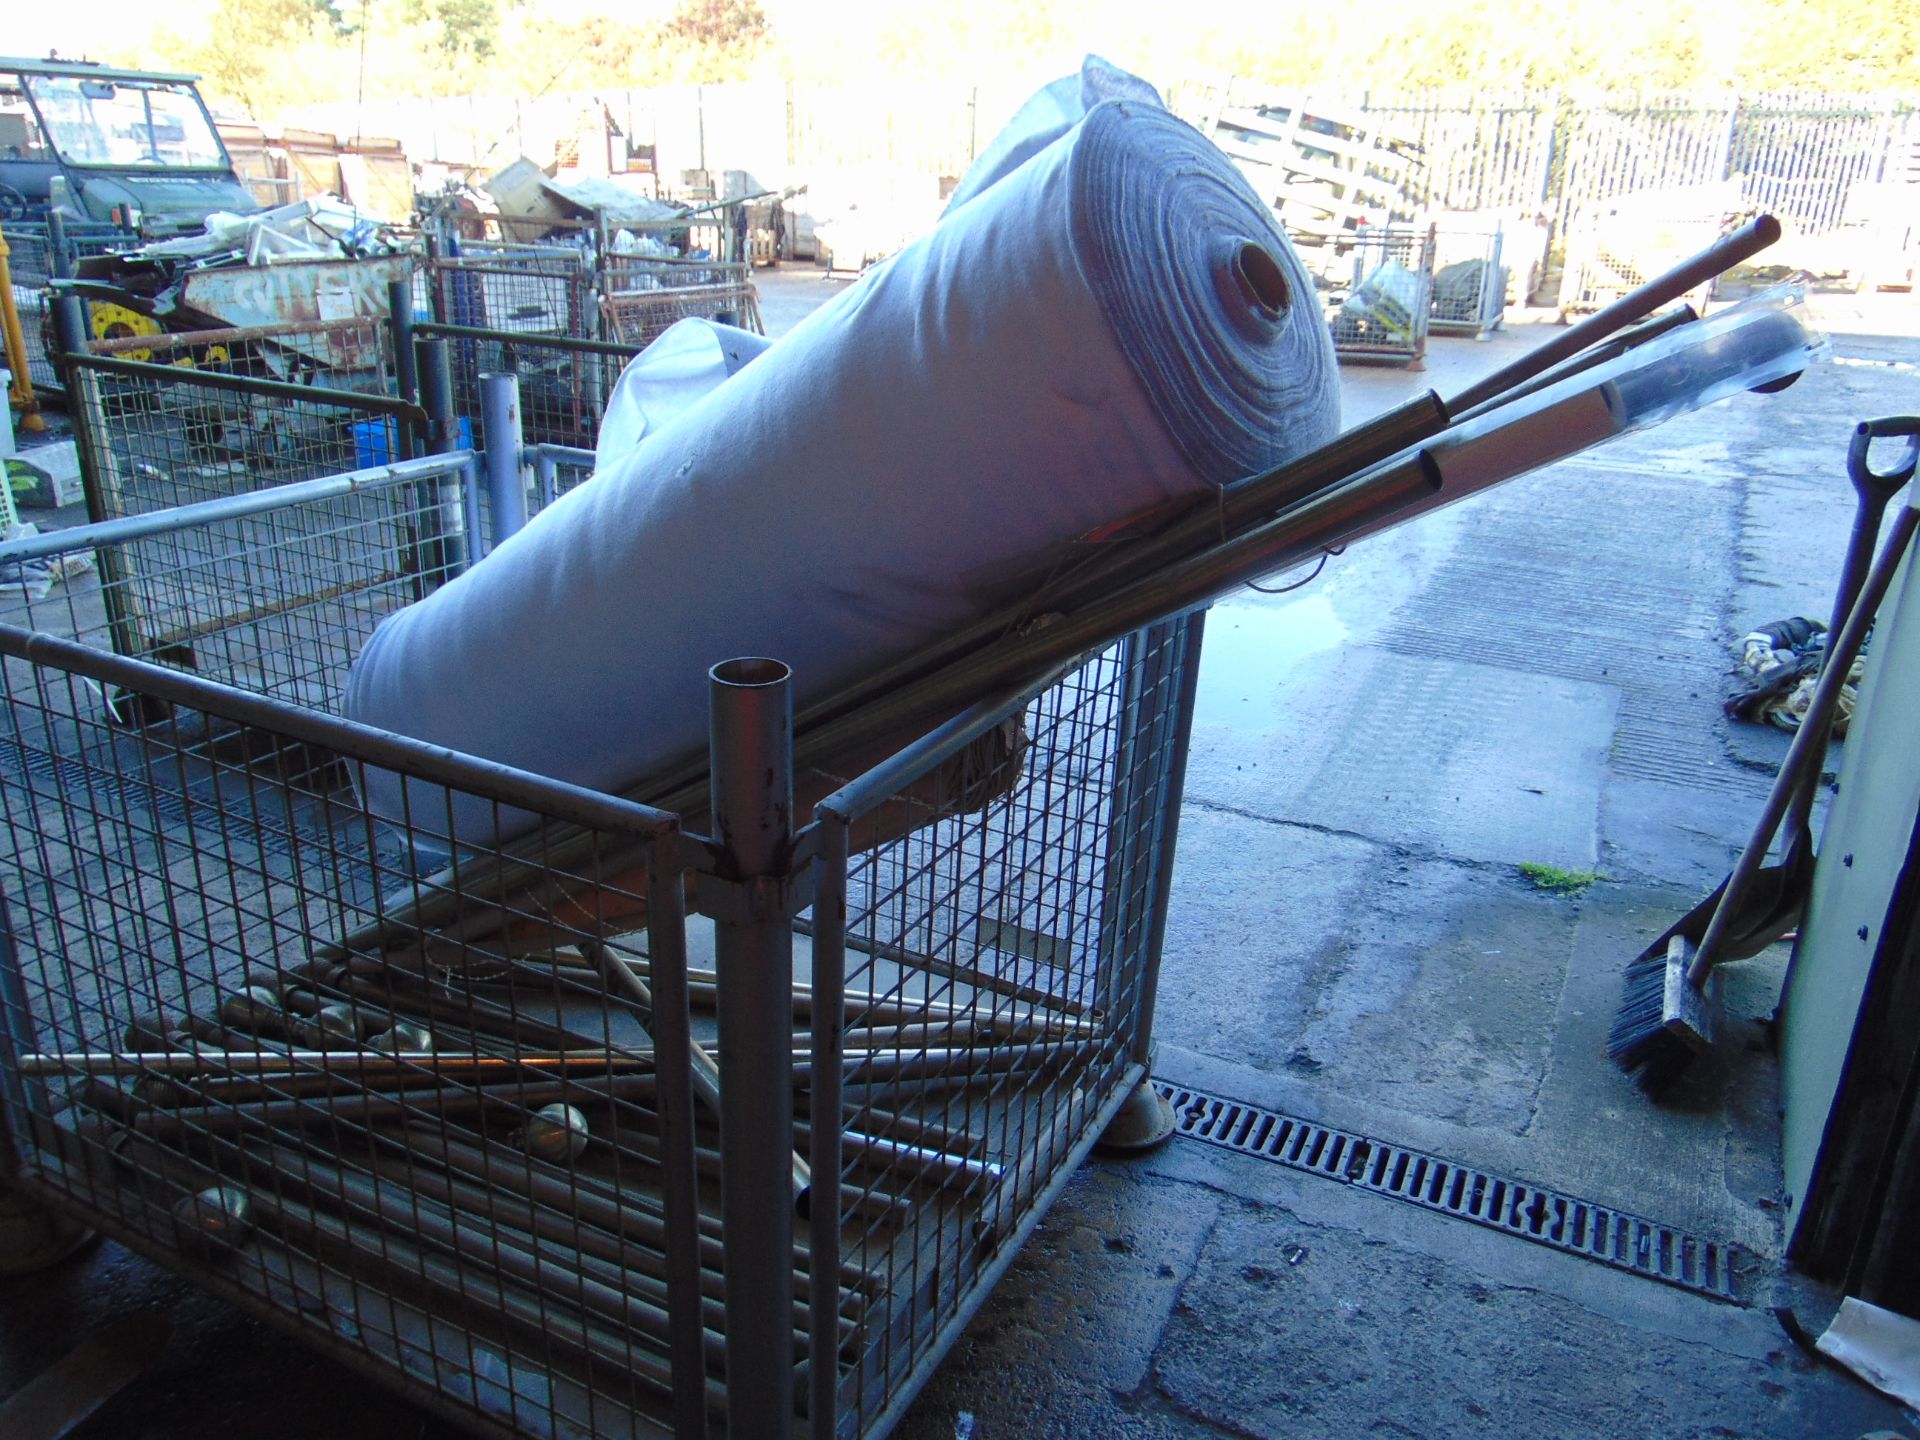 1x Stillage Large Roll of Insulating Material Curton Rails, Copper Pipe etc - Image 6 of 6